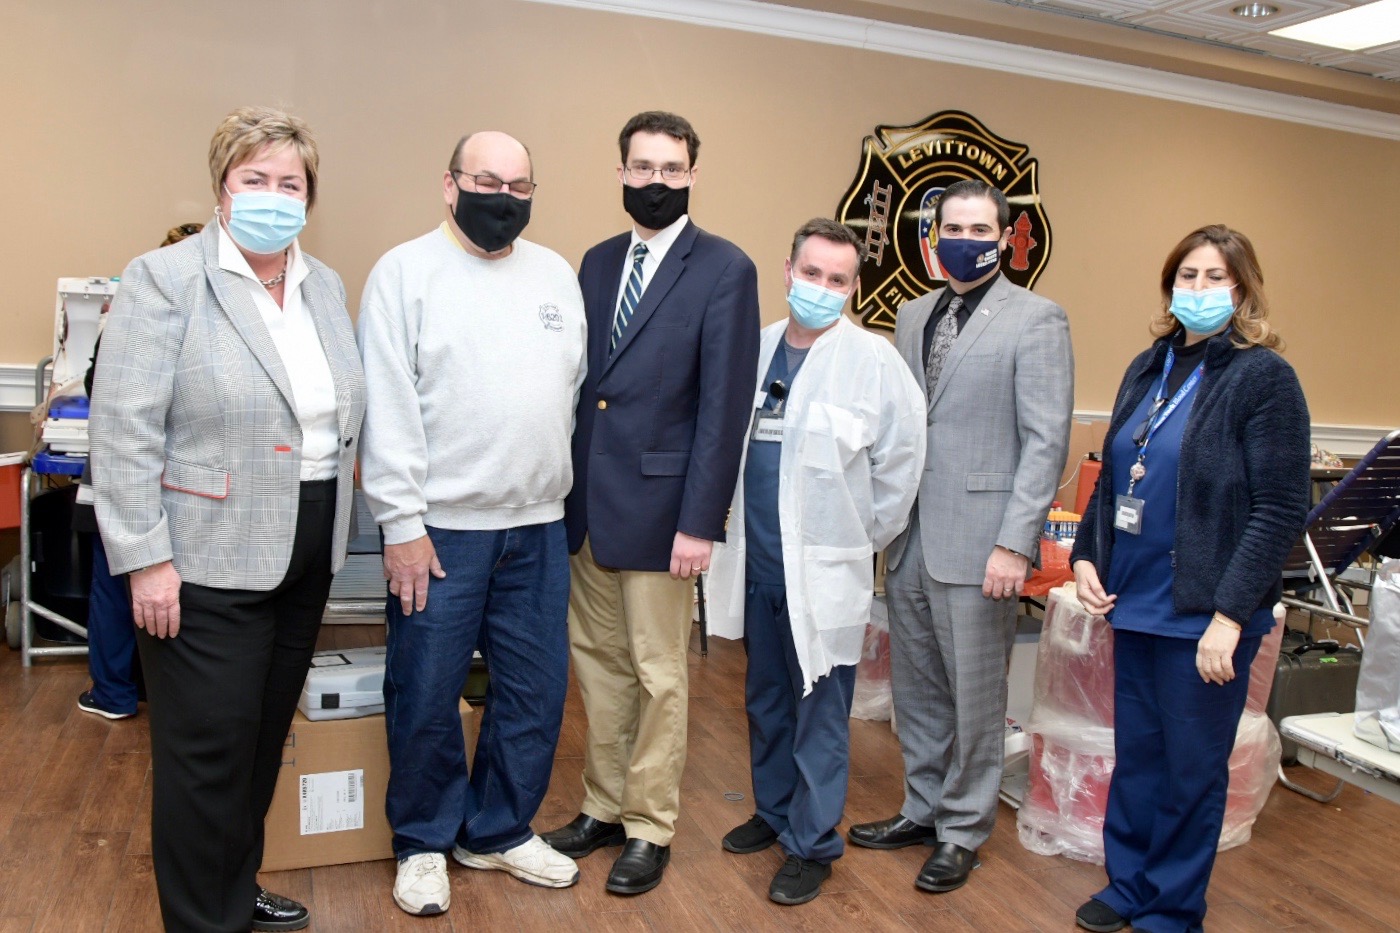 Pictured above from left to right: Hempstead Town Clerk Kate Murray, Levittown Fire Department Ex-Captain Blood Drive Chairperson Ron Hlawaty, Assemblyman John Mikulin, PE Supervisor Dionis Xhindolli,